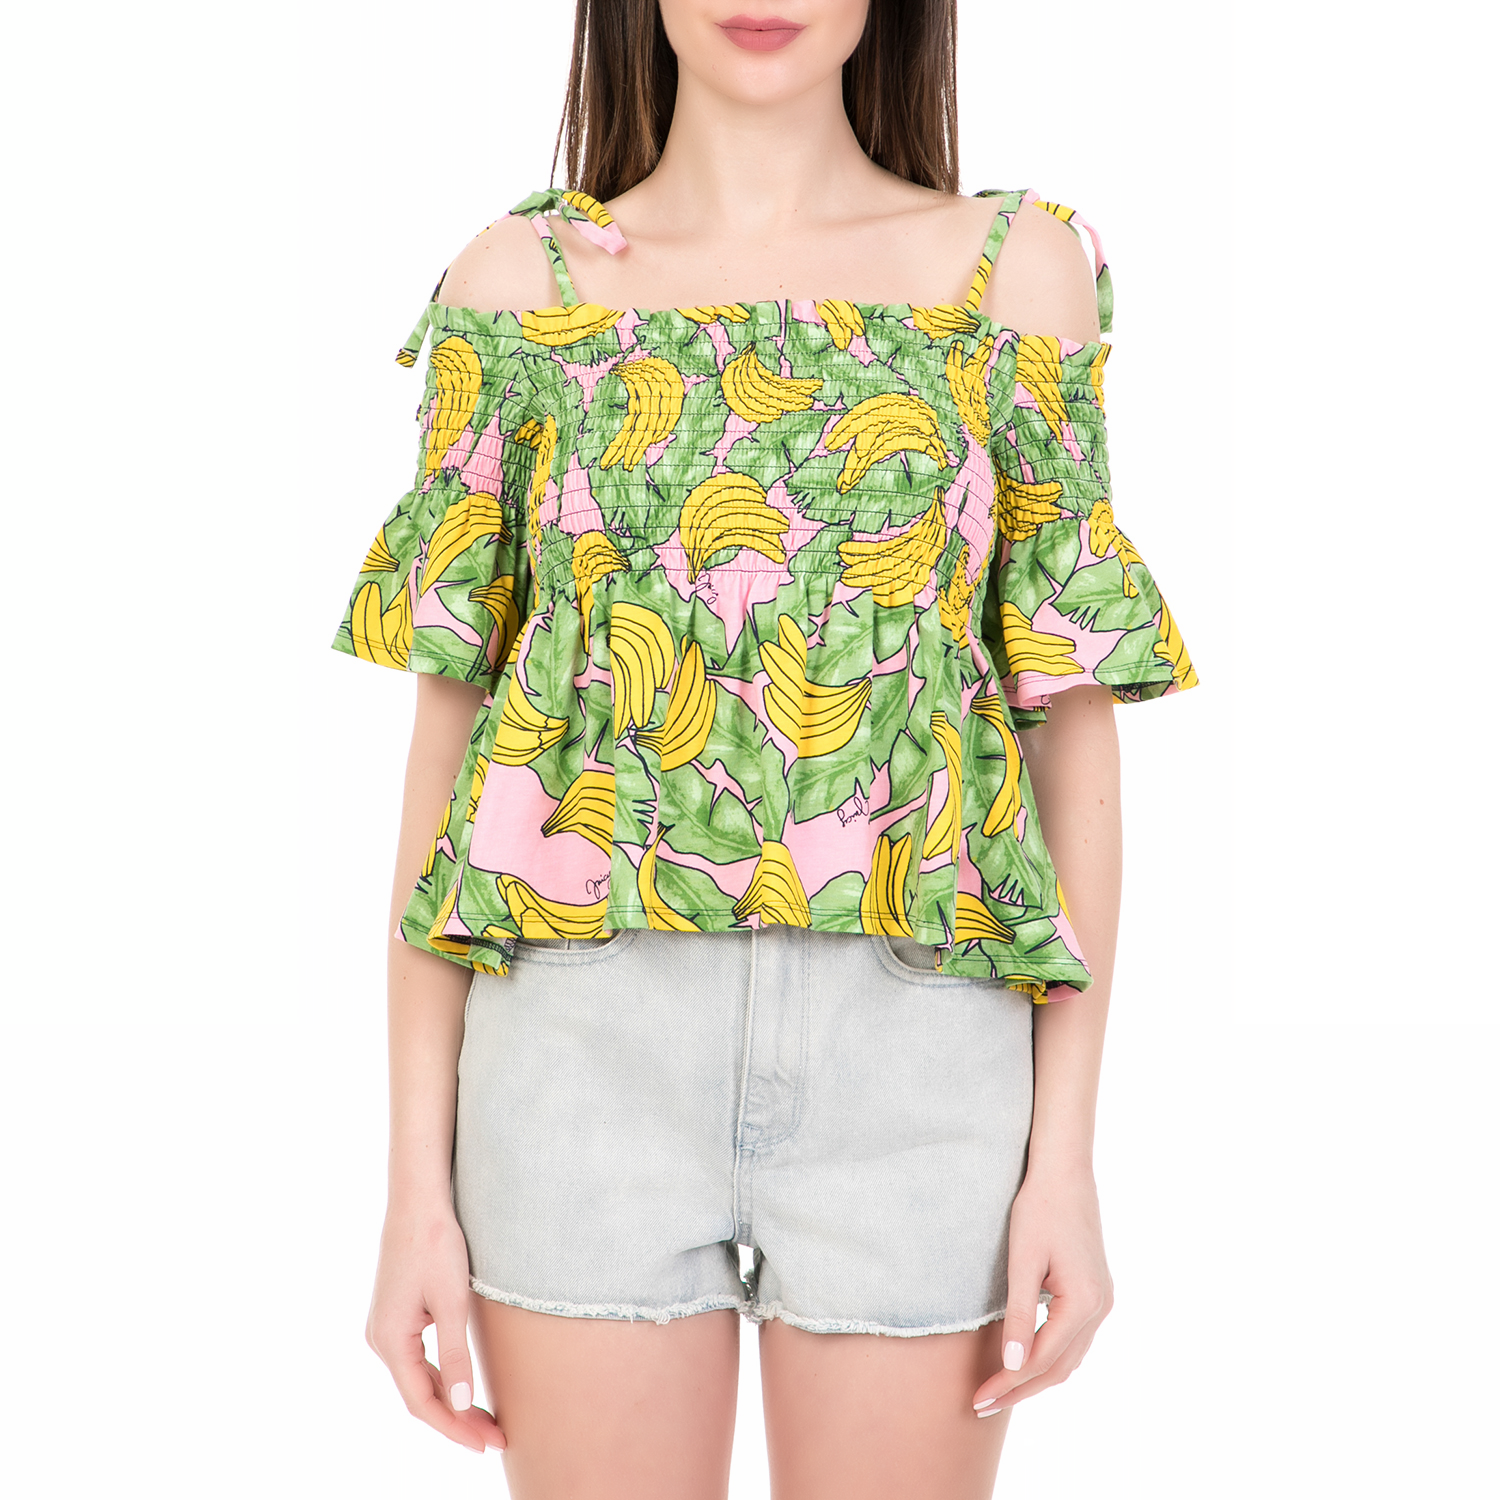 JUICY COUTURE Γυναικεία off the shoulders μπλούζα BANANA PRINT JUICY COUTURE ροζ